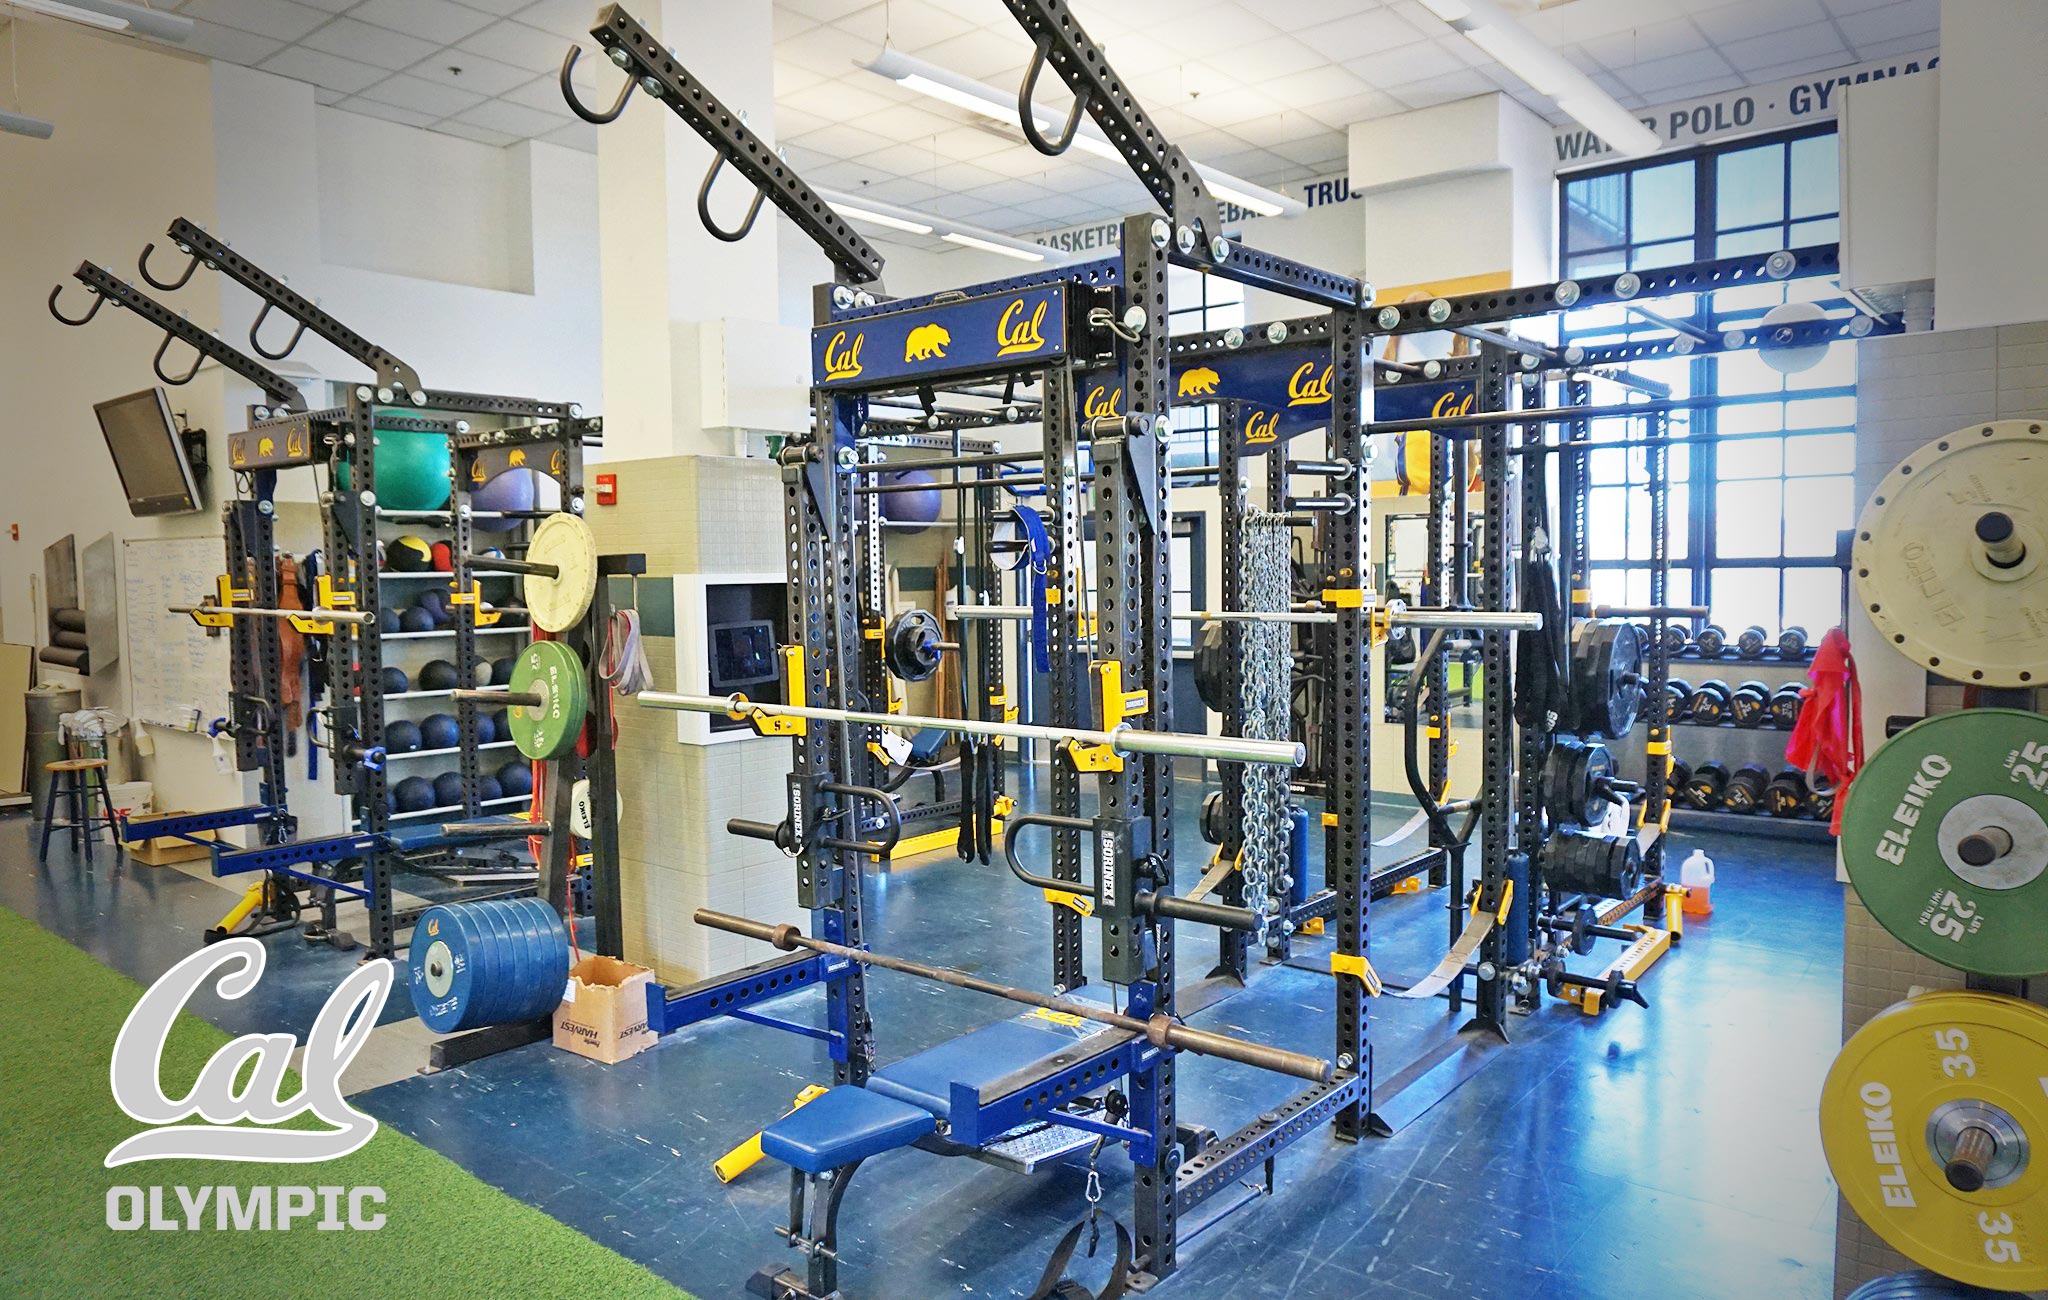 University of california olympic Sorinex strength and conditioning facility